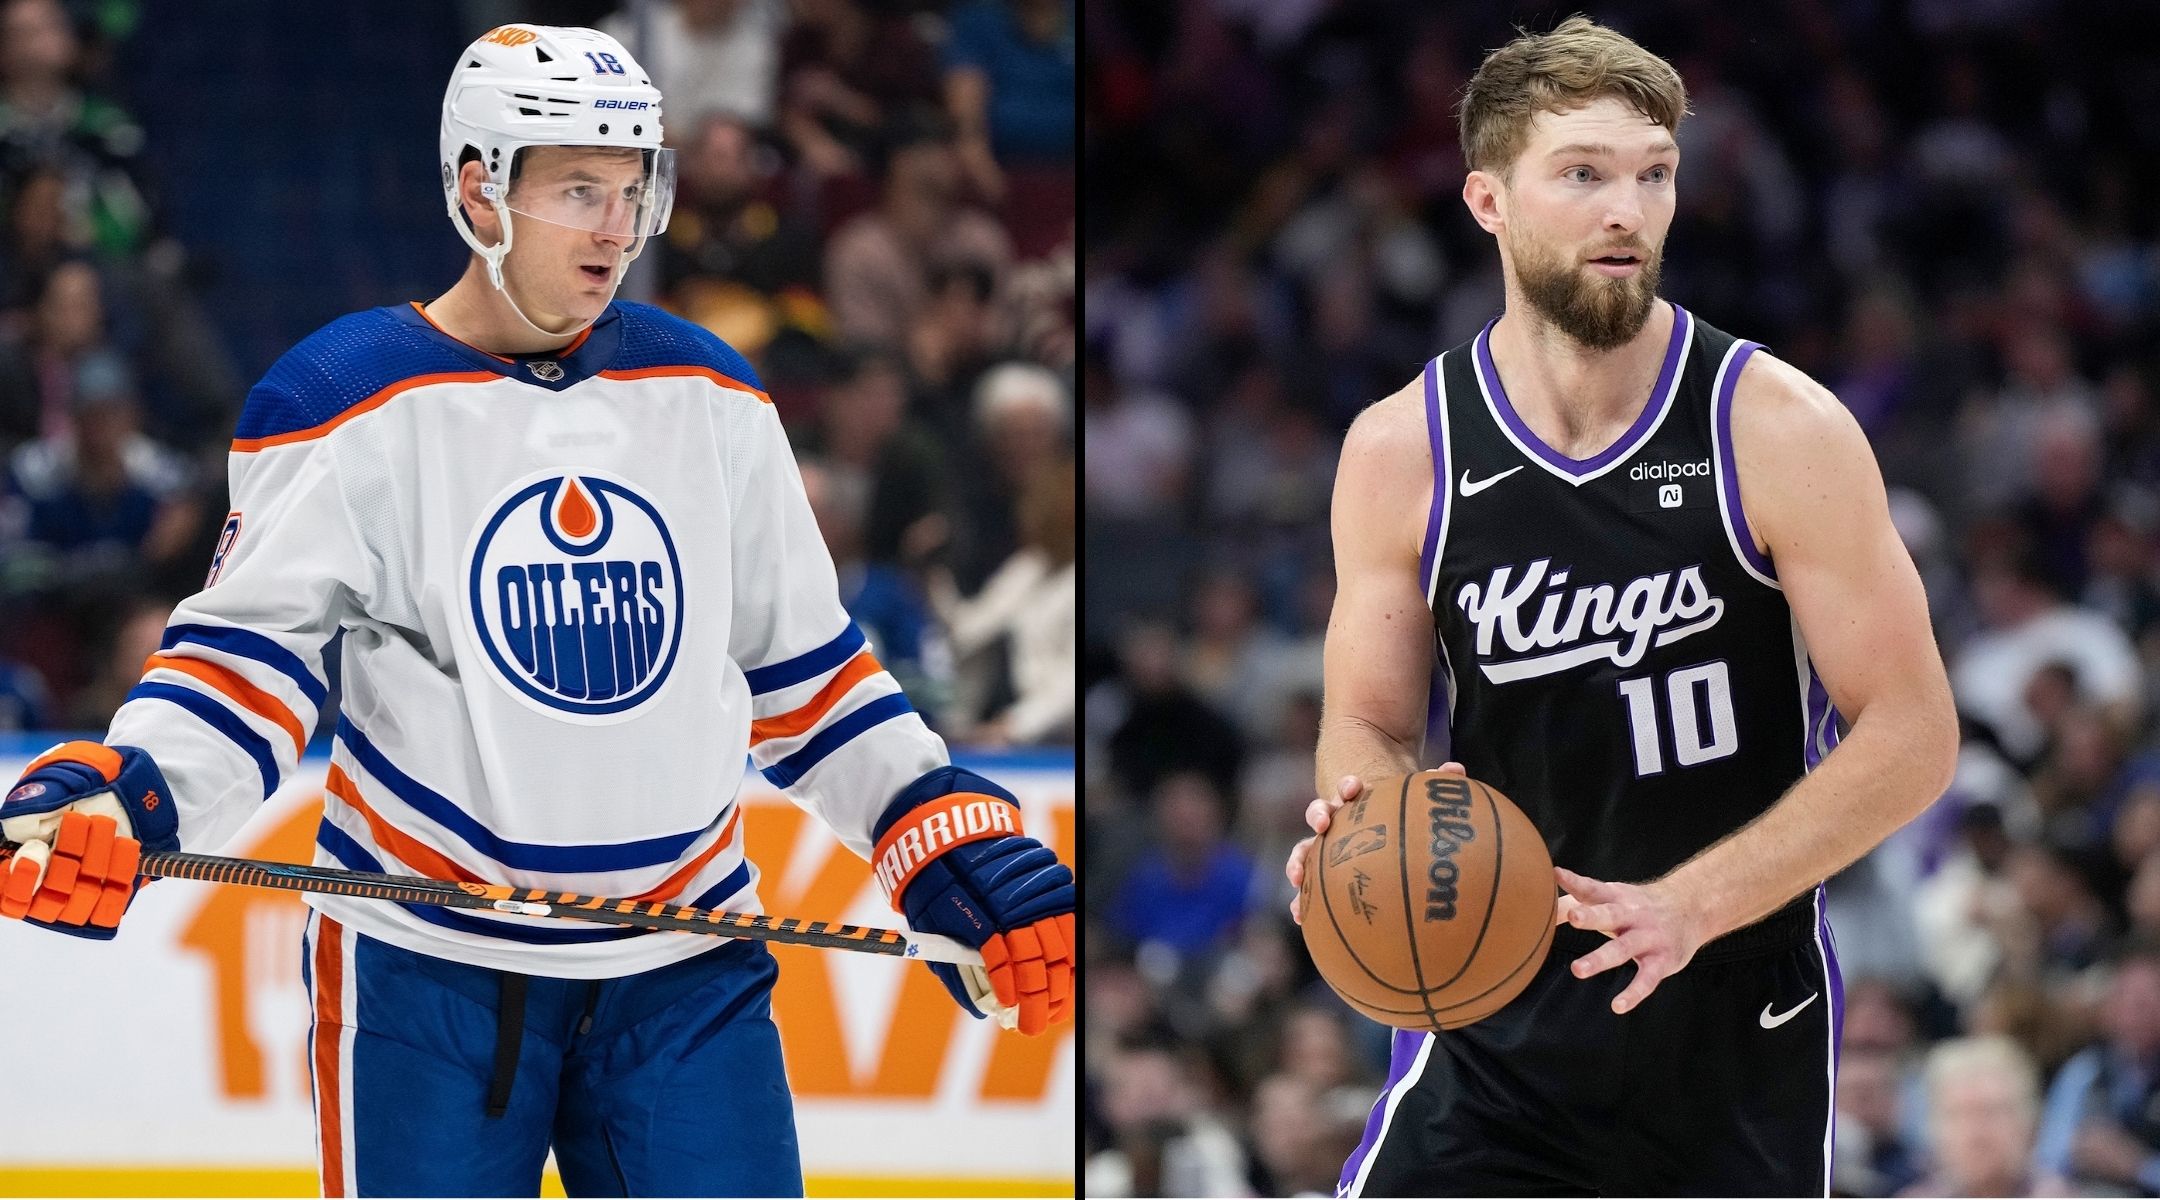 Zach Hyman, left, and Domantas Sabonis, right, are enjoying historic seasons. (Getty Images)